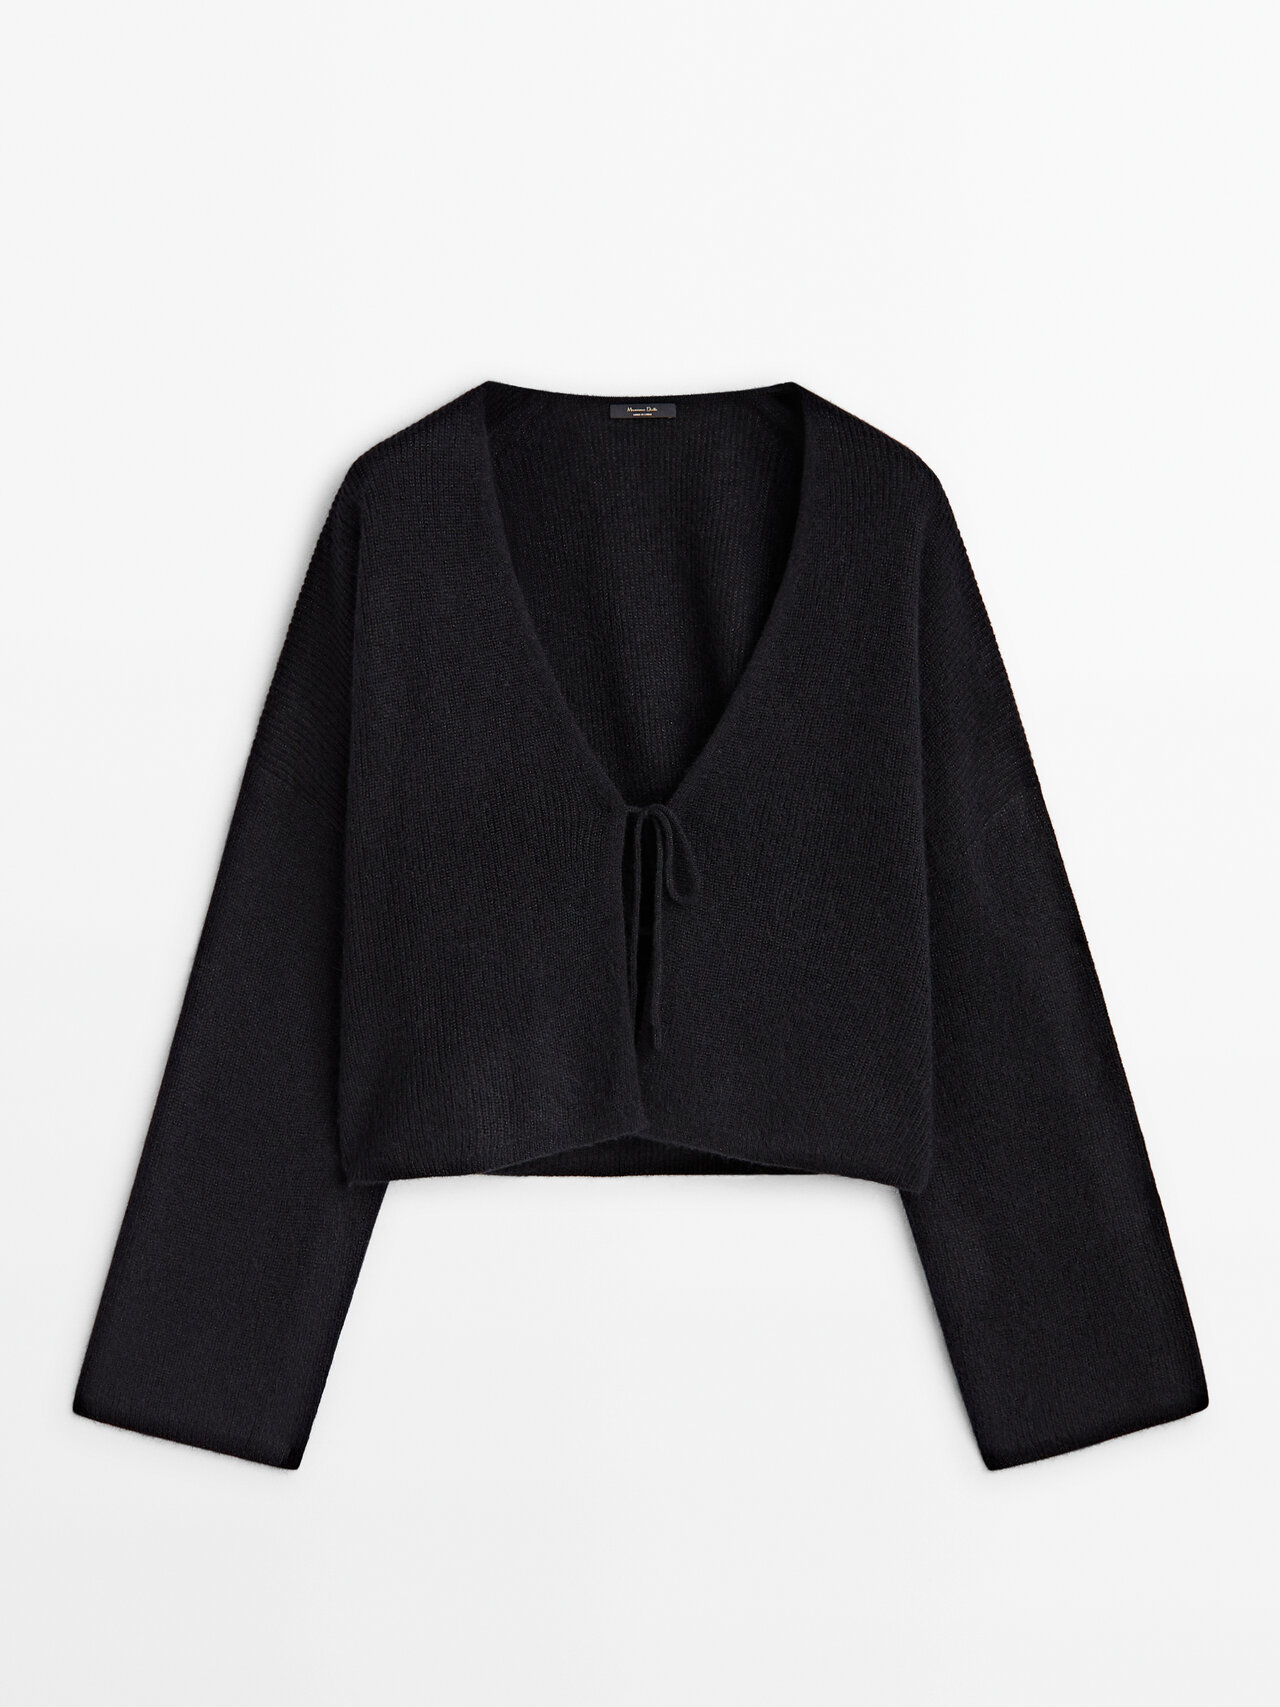 Massimo Dutti Short Shimmery Knit Cardigan With Tie Detail In Black